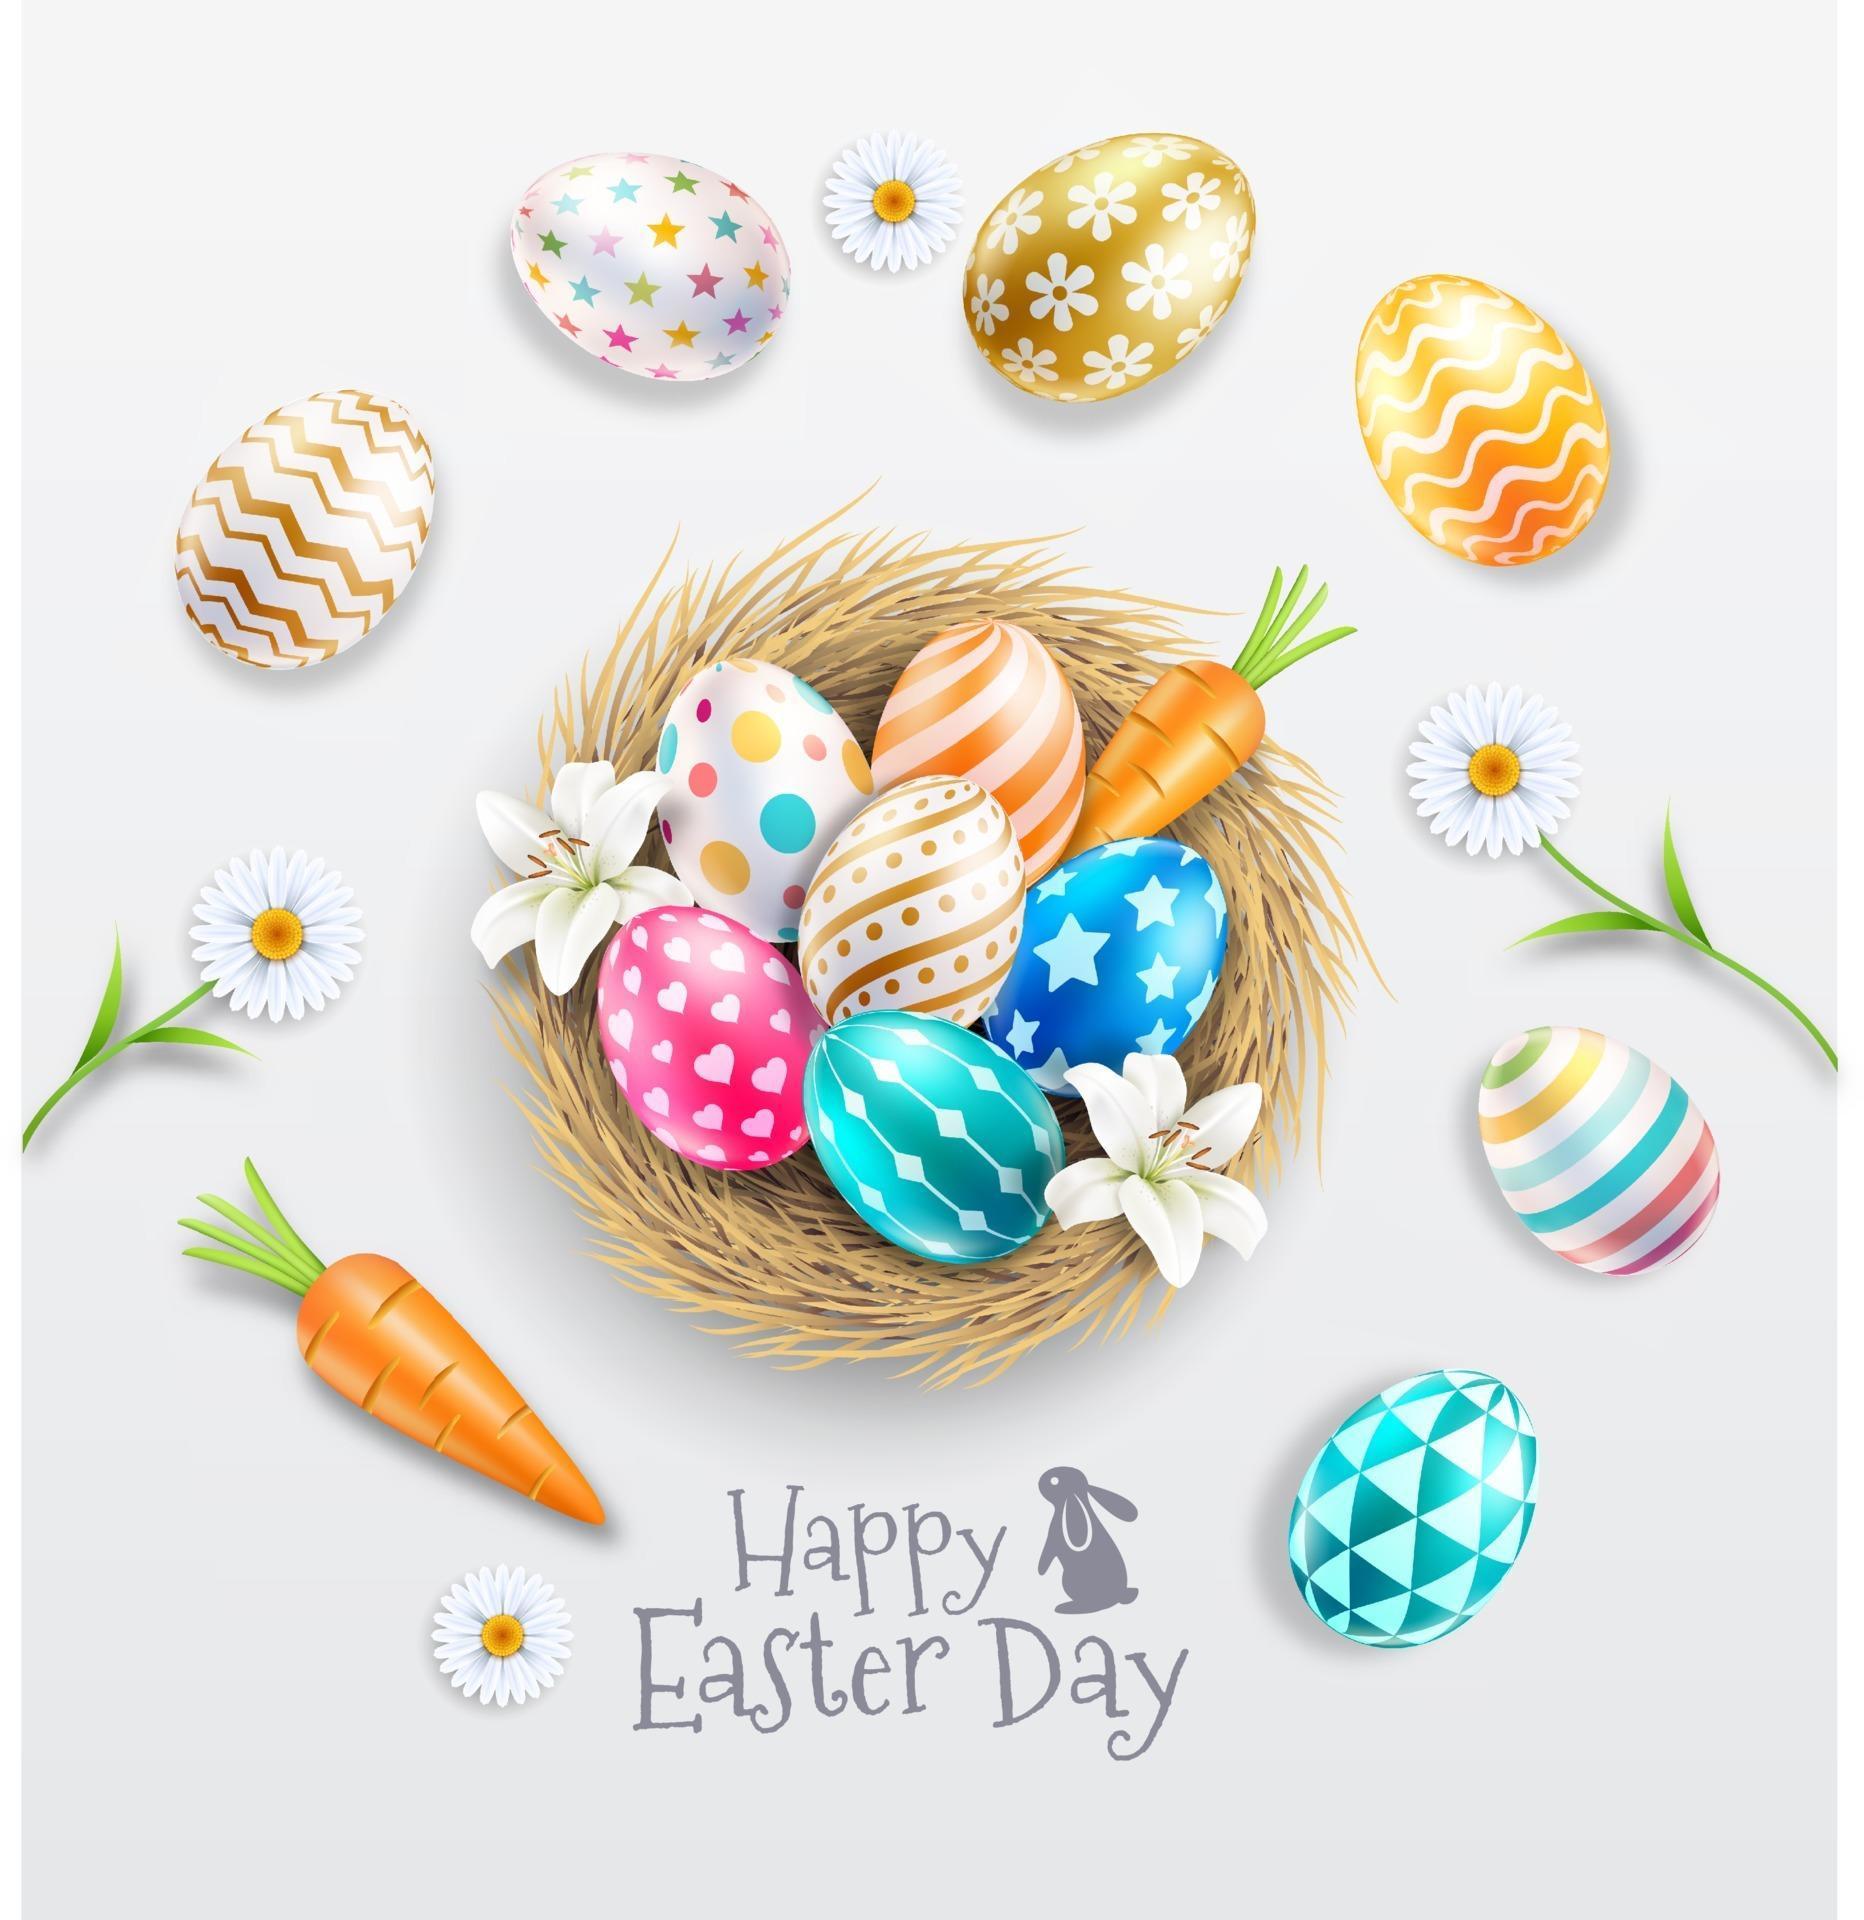 Happy easter day colorful patterned easter eggs in egg nest with lilies and daisies. vector